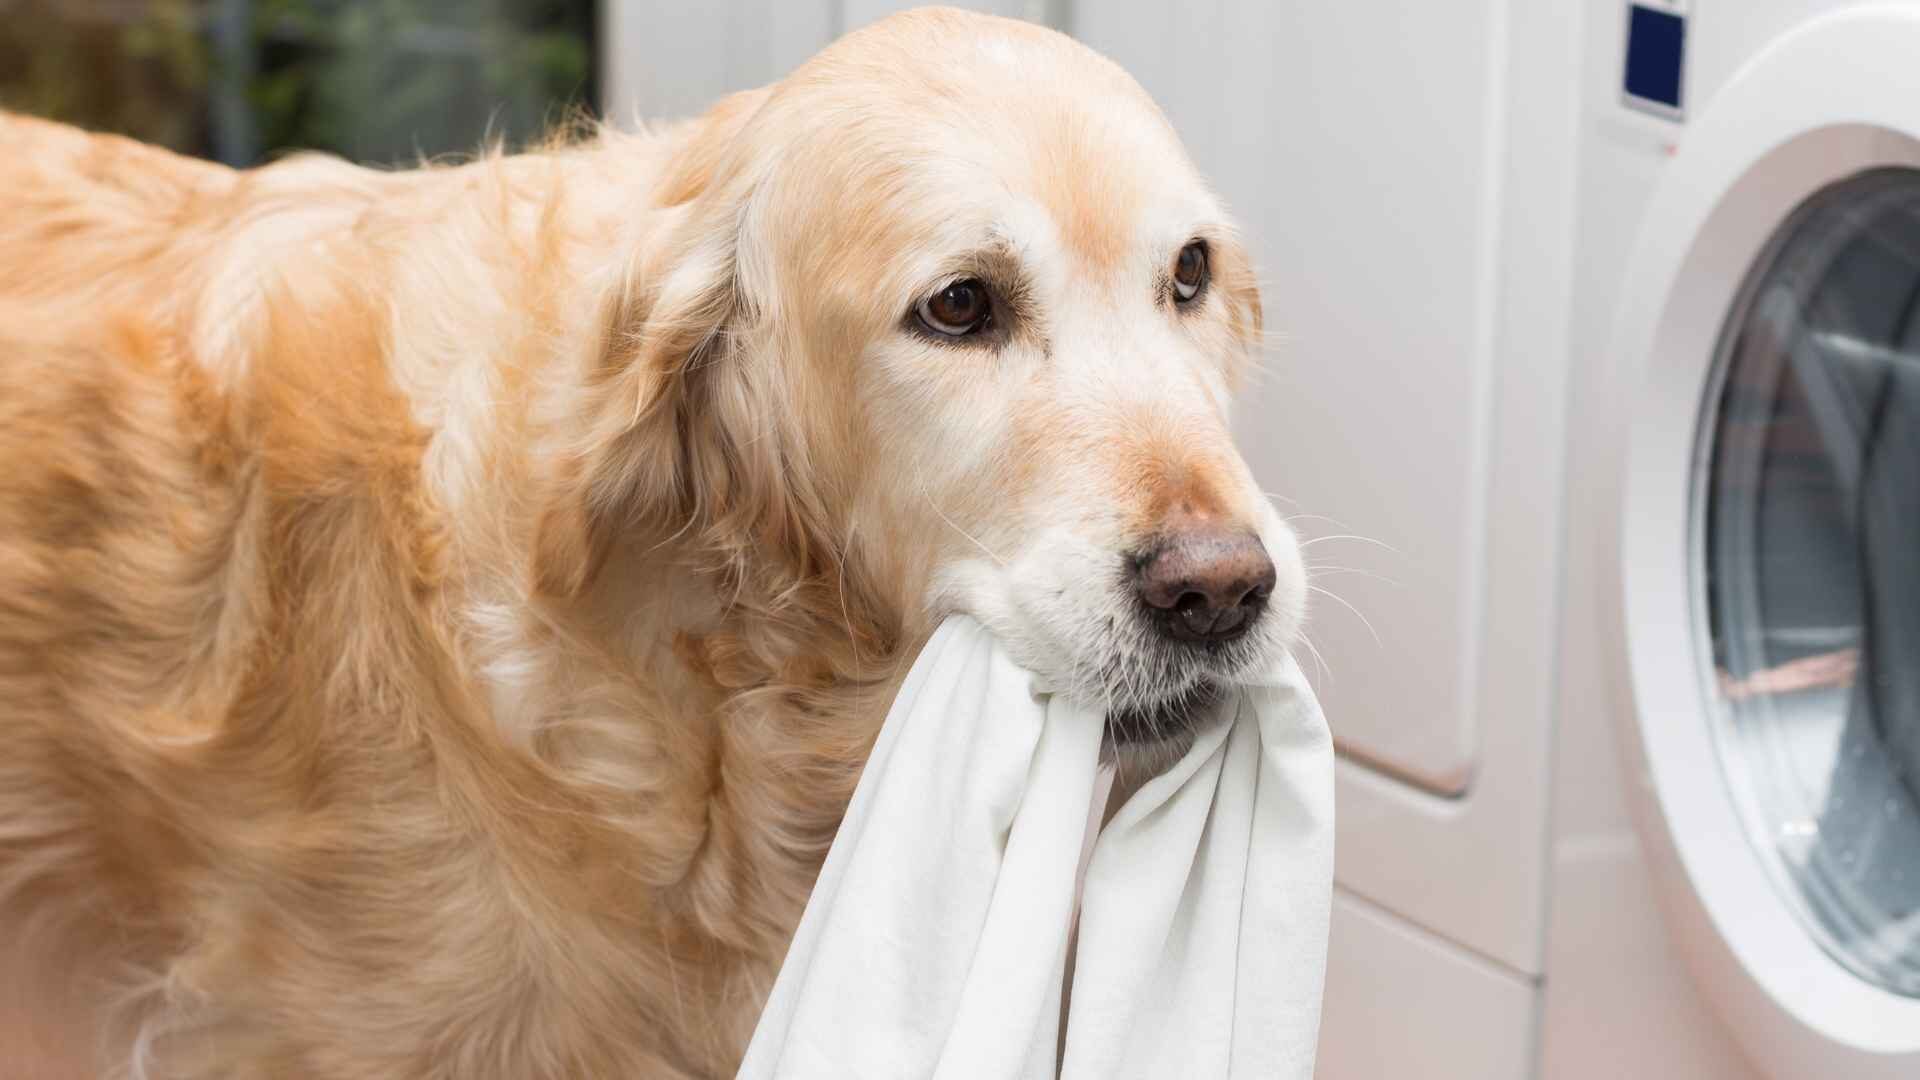 My Dog Ate a Dryer Sheet What Do I Do: Guide to Know